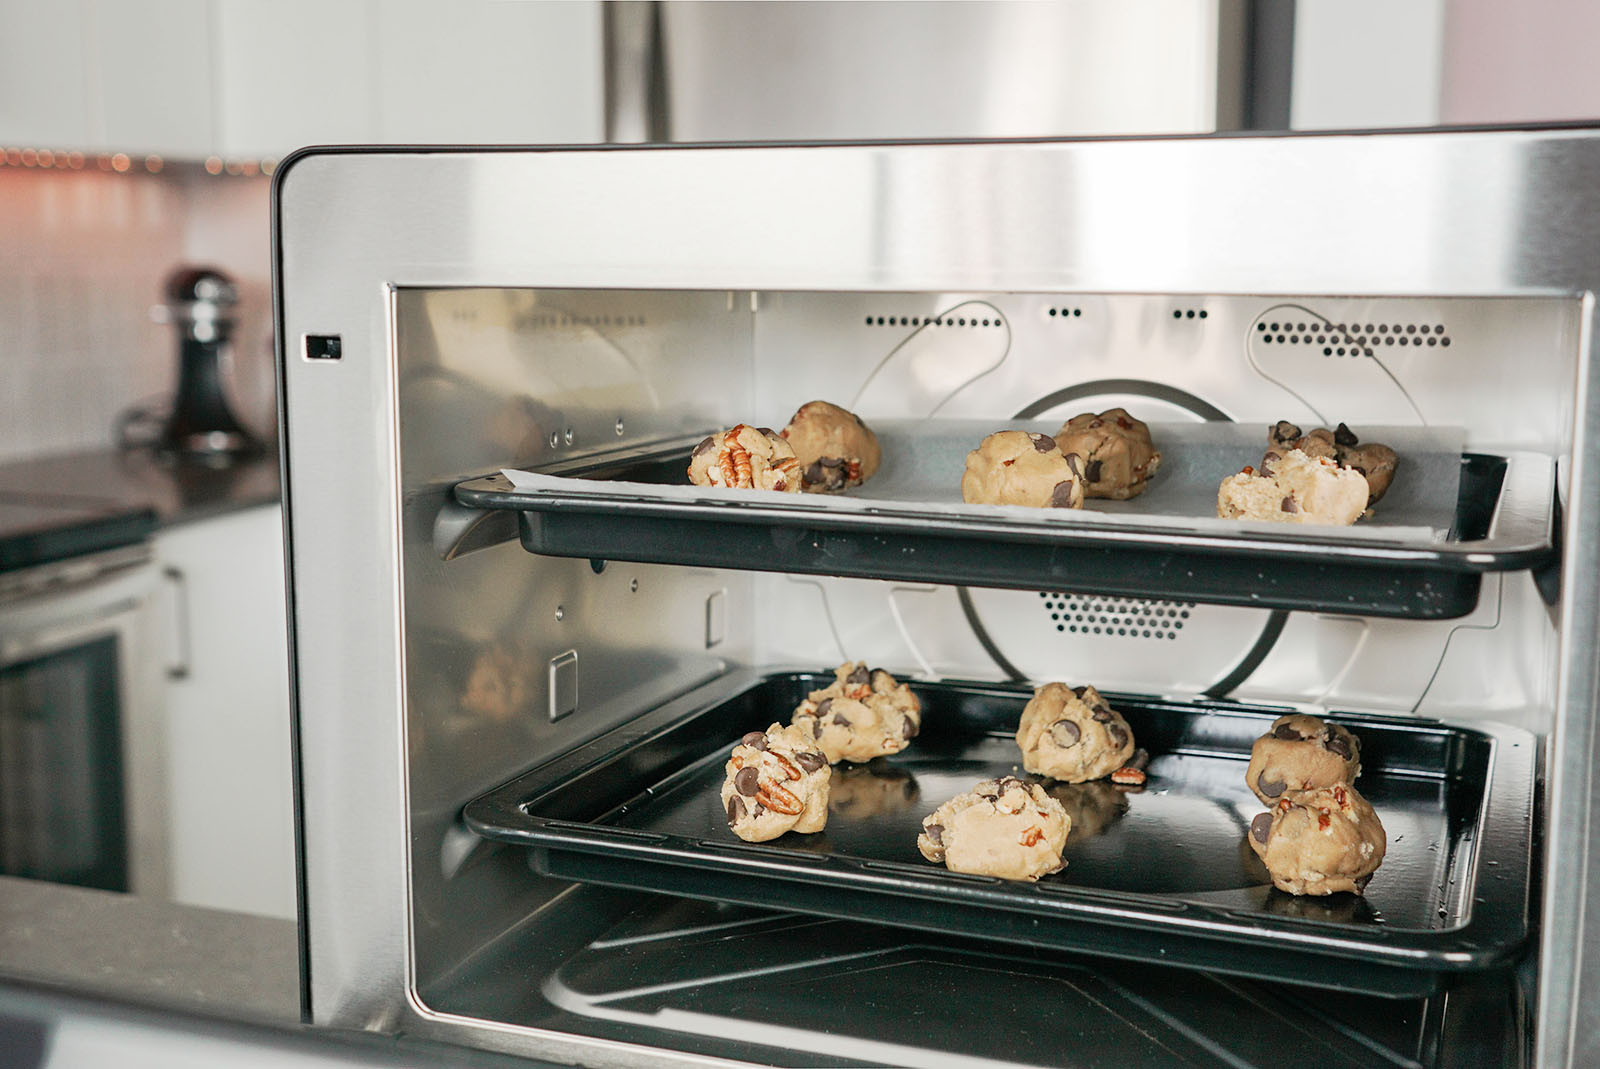 Panasonic Air Fry True Convection Steam Toaster Oven bake